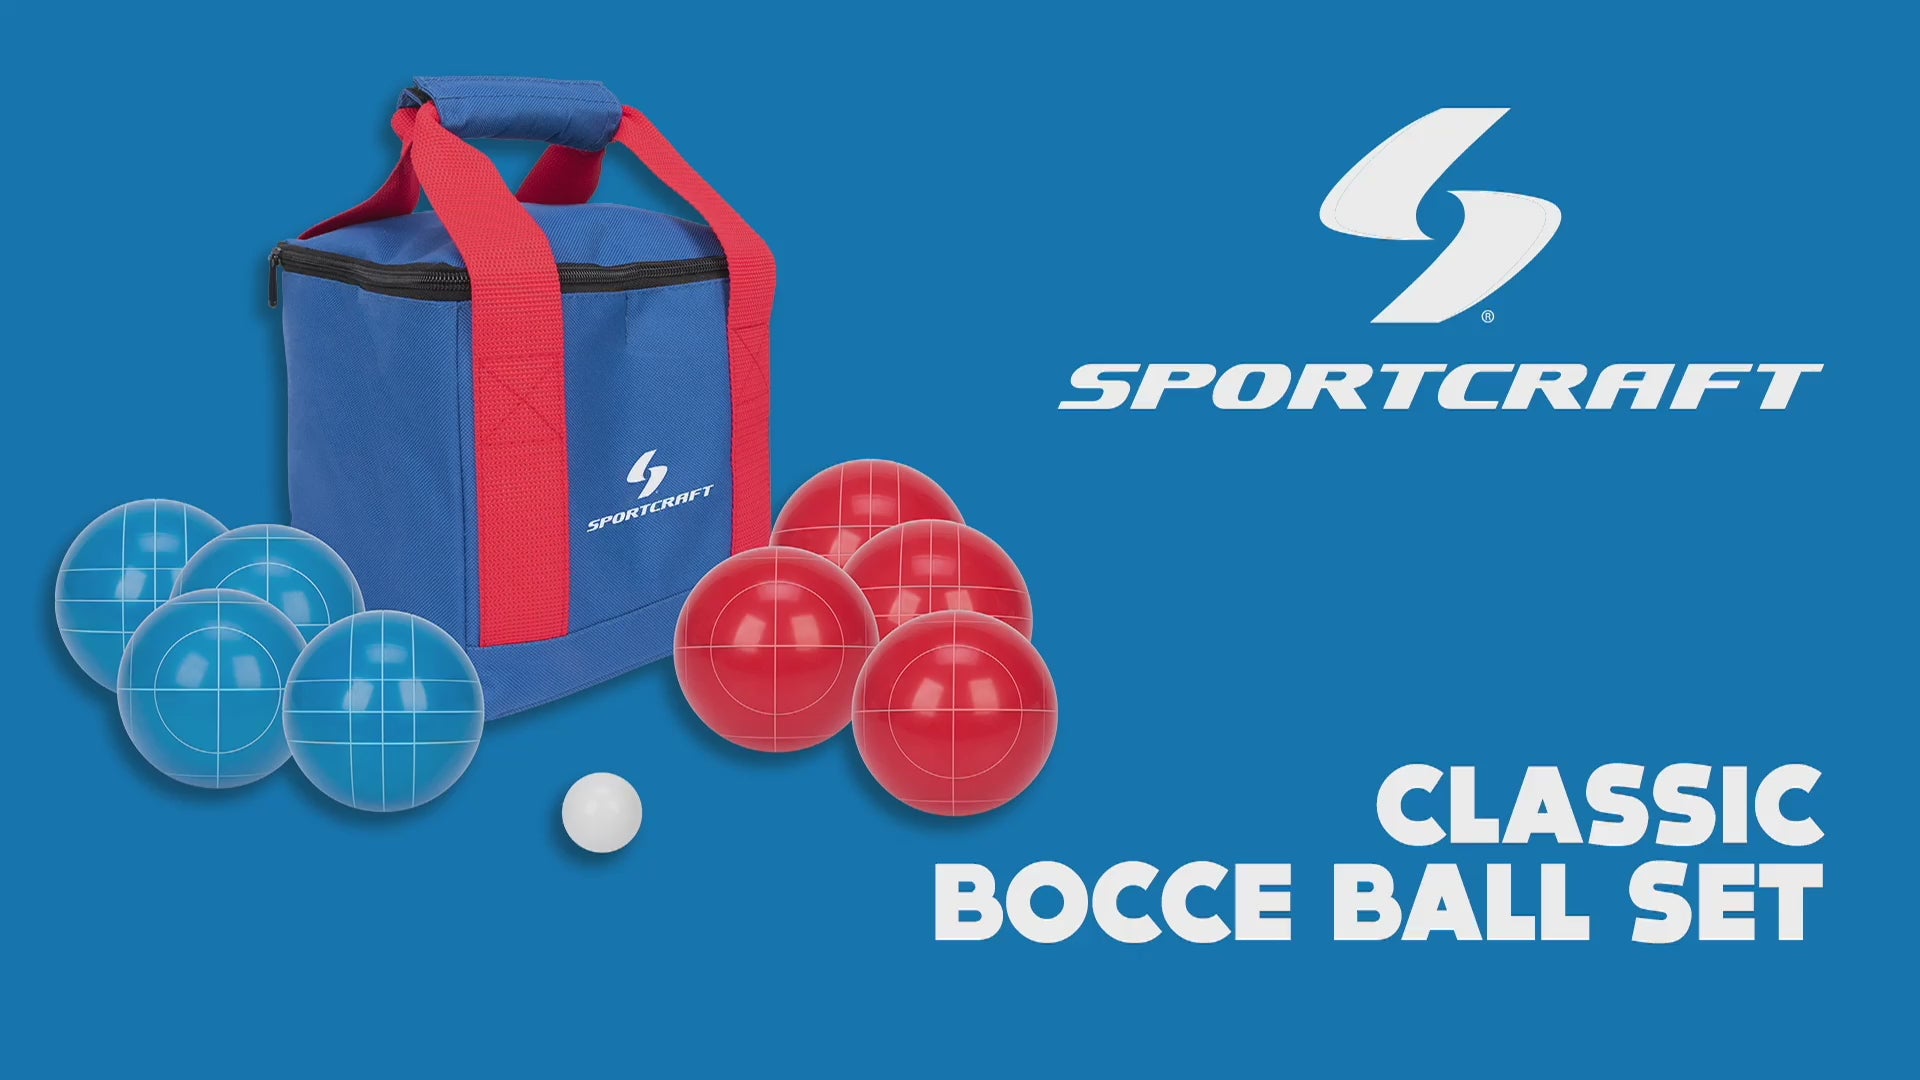 Sportcraft Bocce Ball Set Video showing product